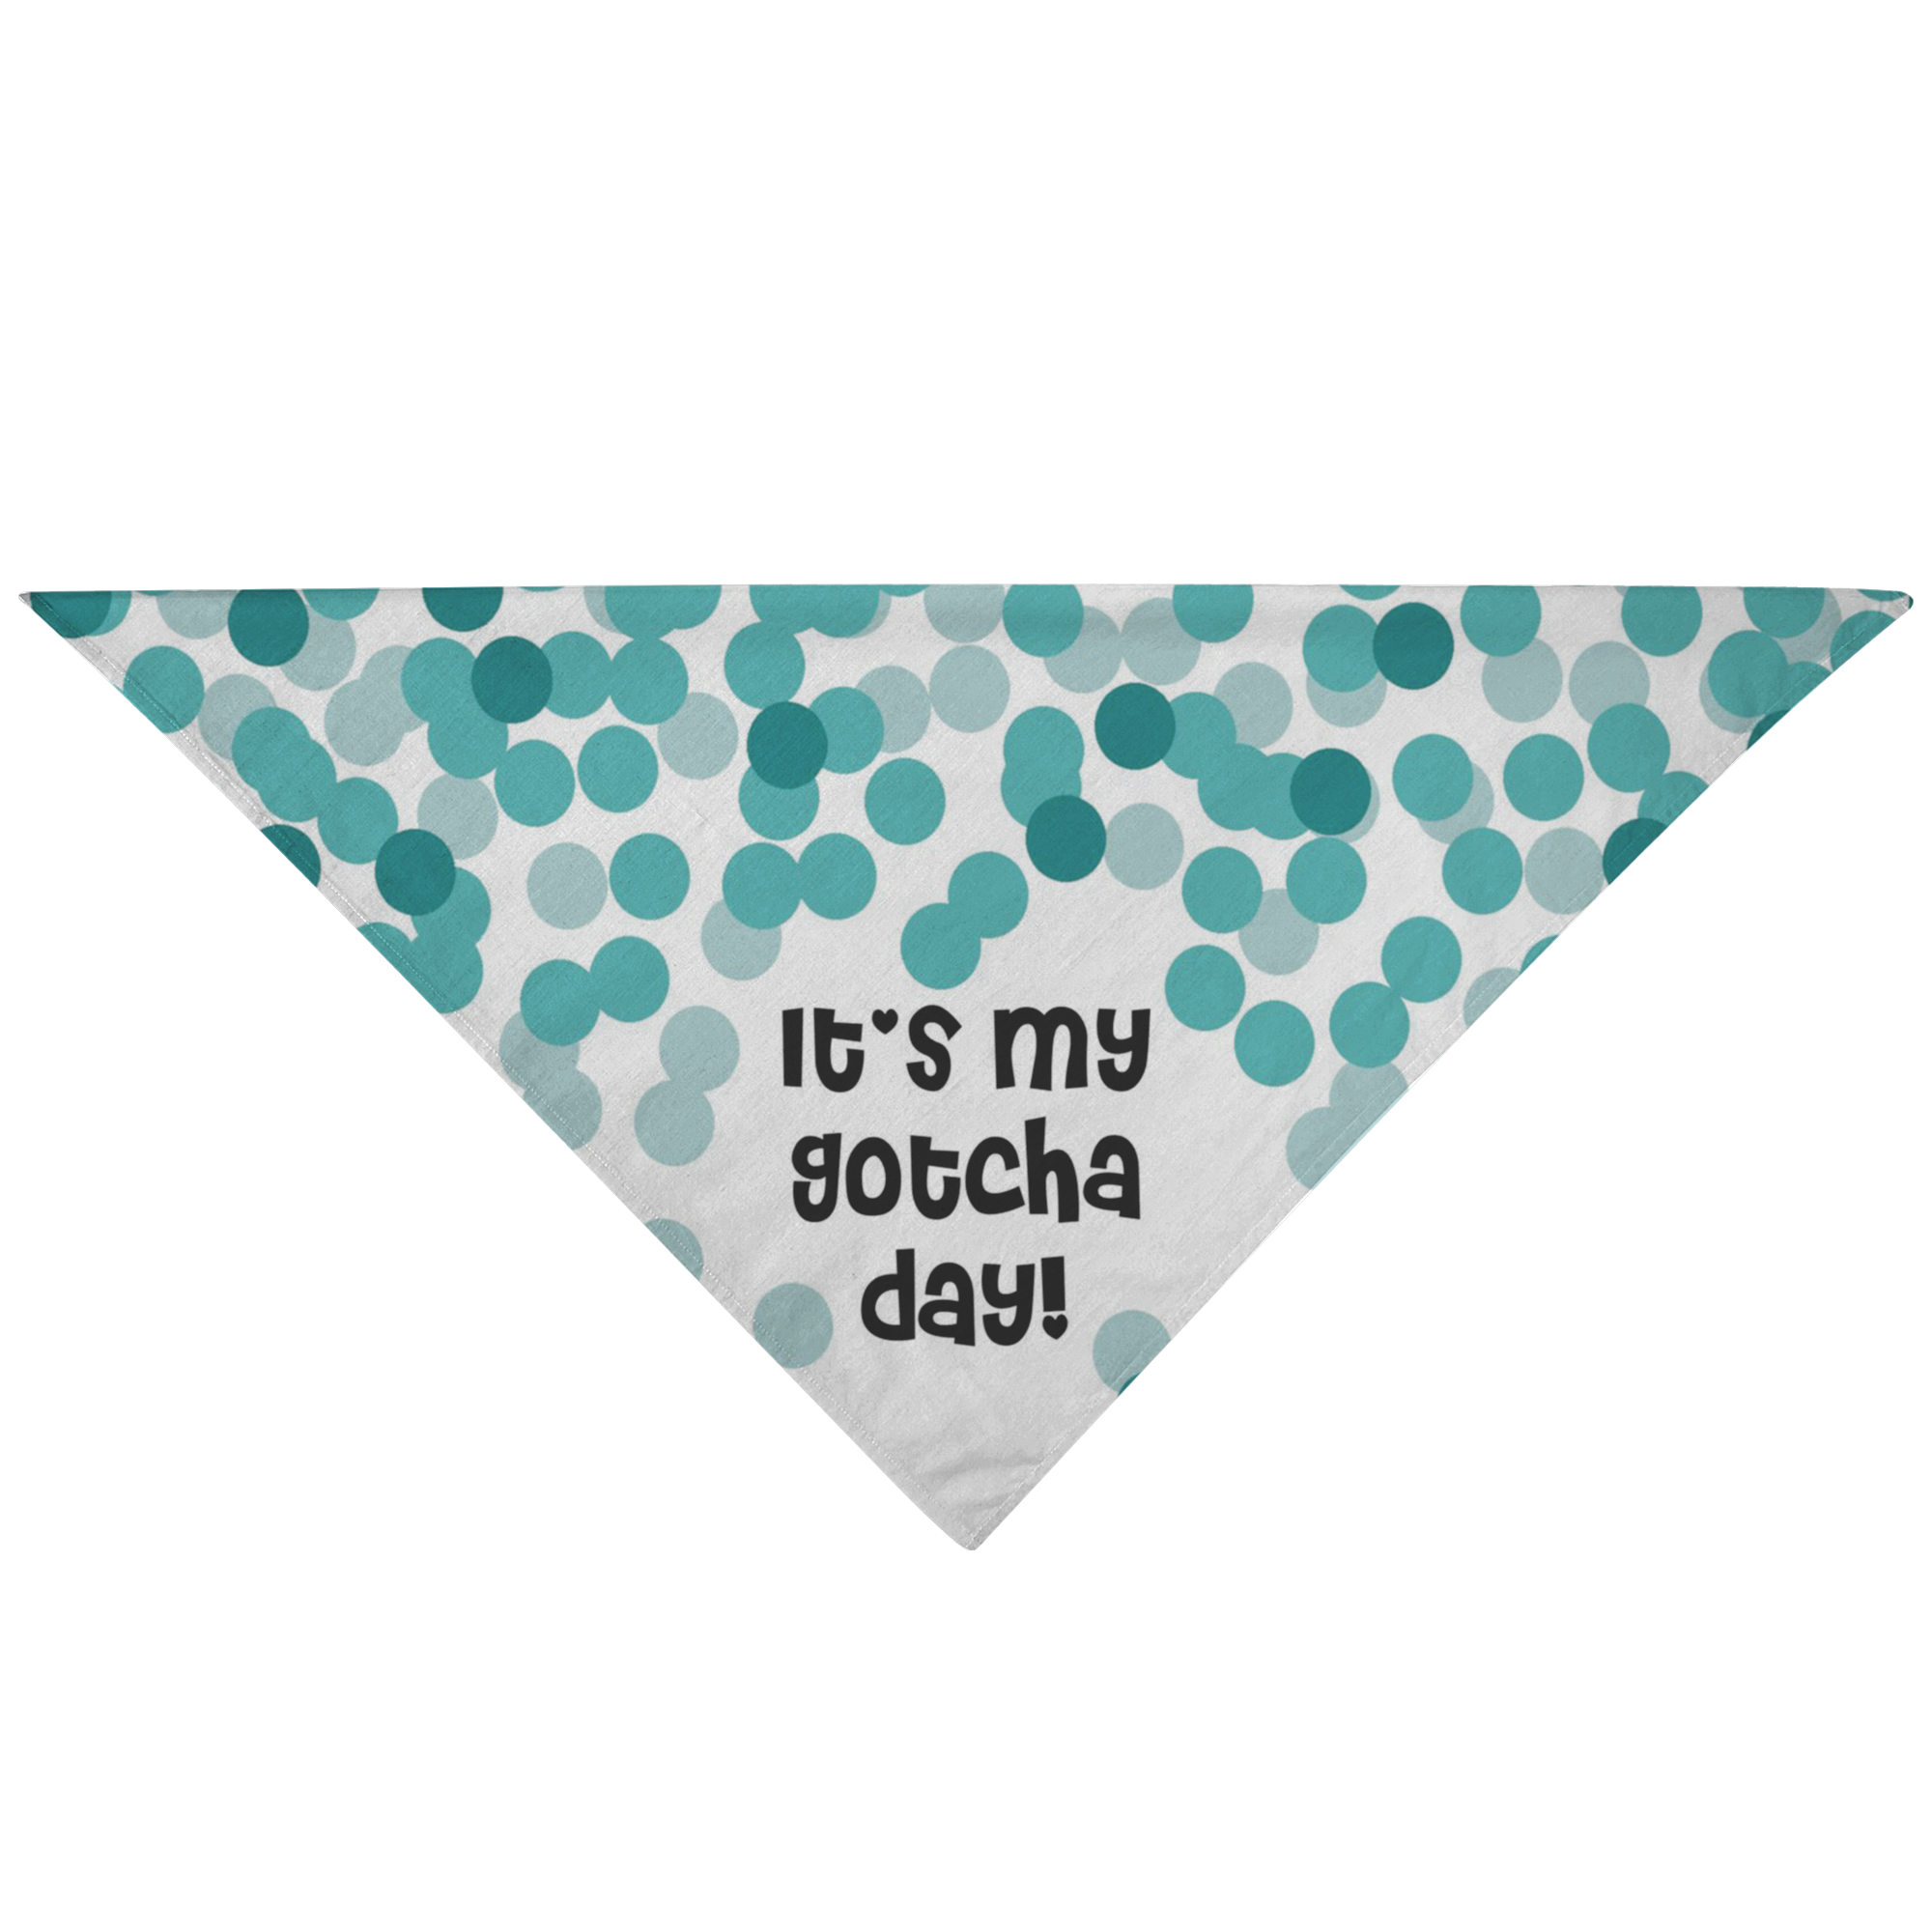 It's My Gotcha Day Dog Birthday Bandana Pet Adoption Animal Rescue Scarf New Dog Congratulations Cat Clothing Puppy Accessory Gifts for Dogs Lovers - Teal